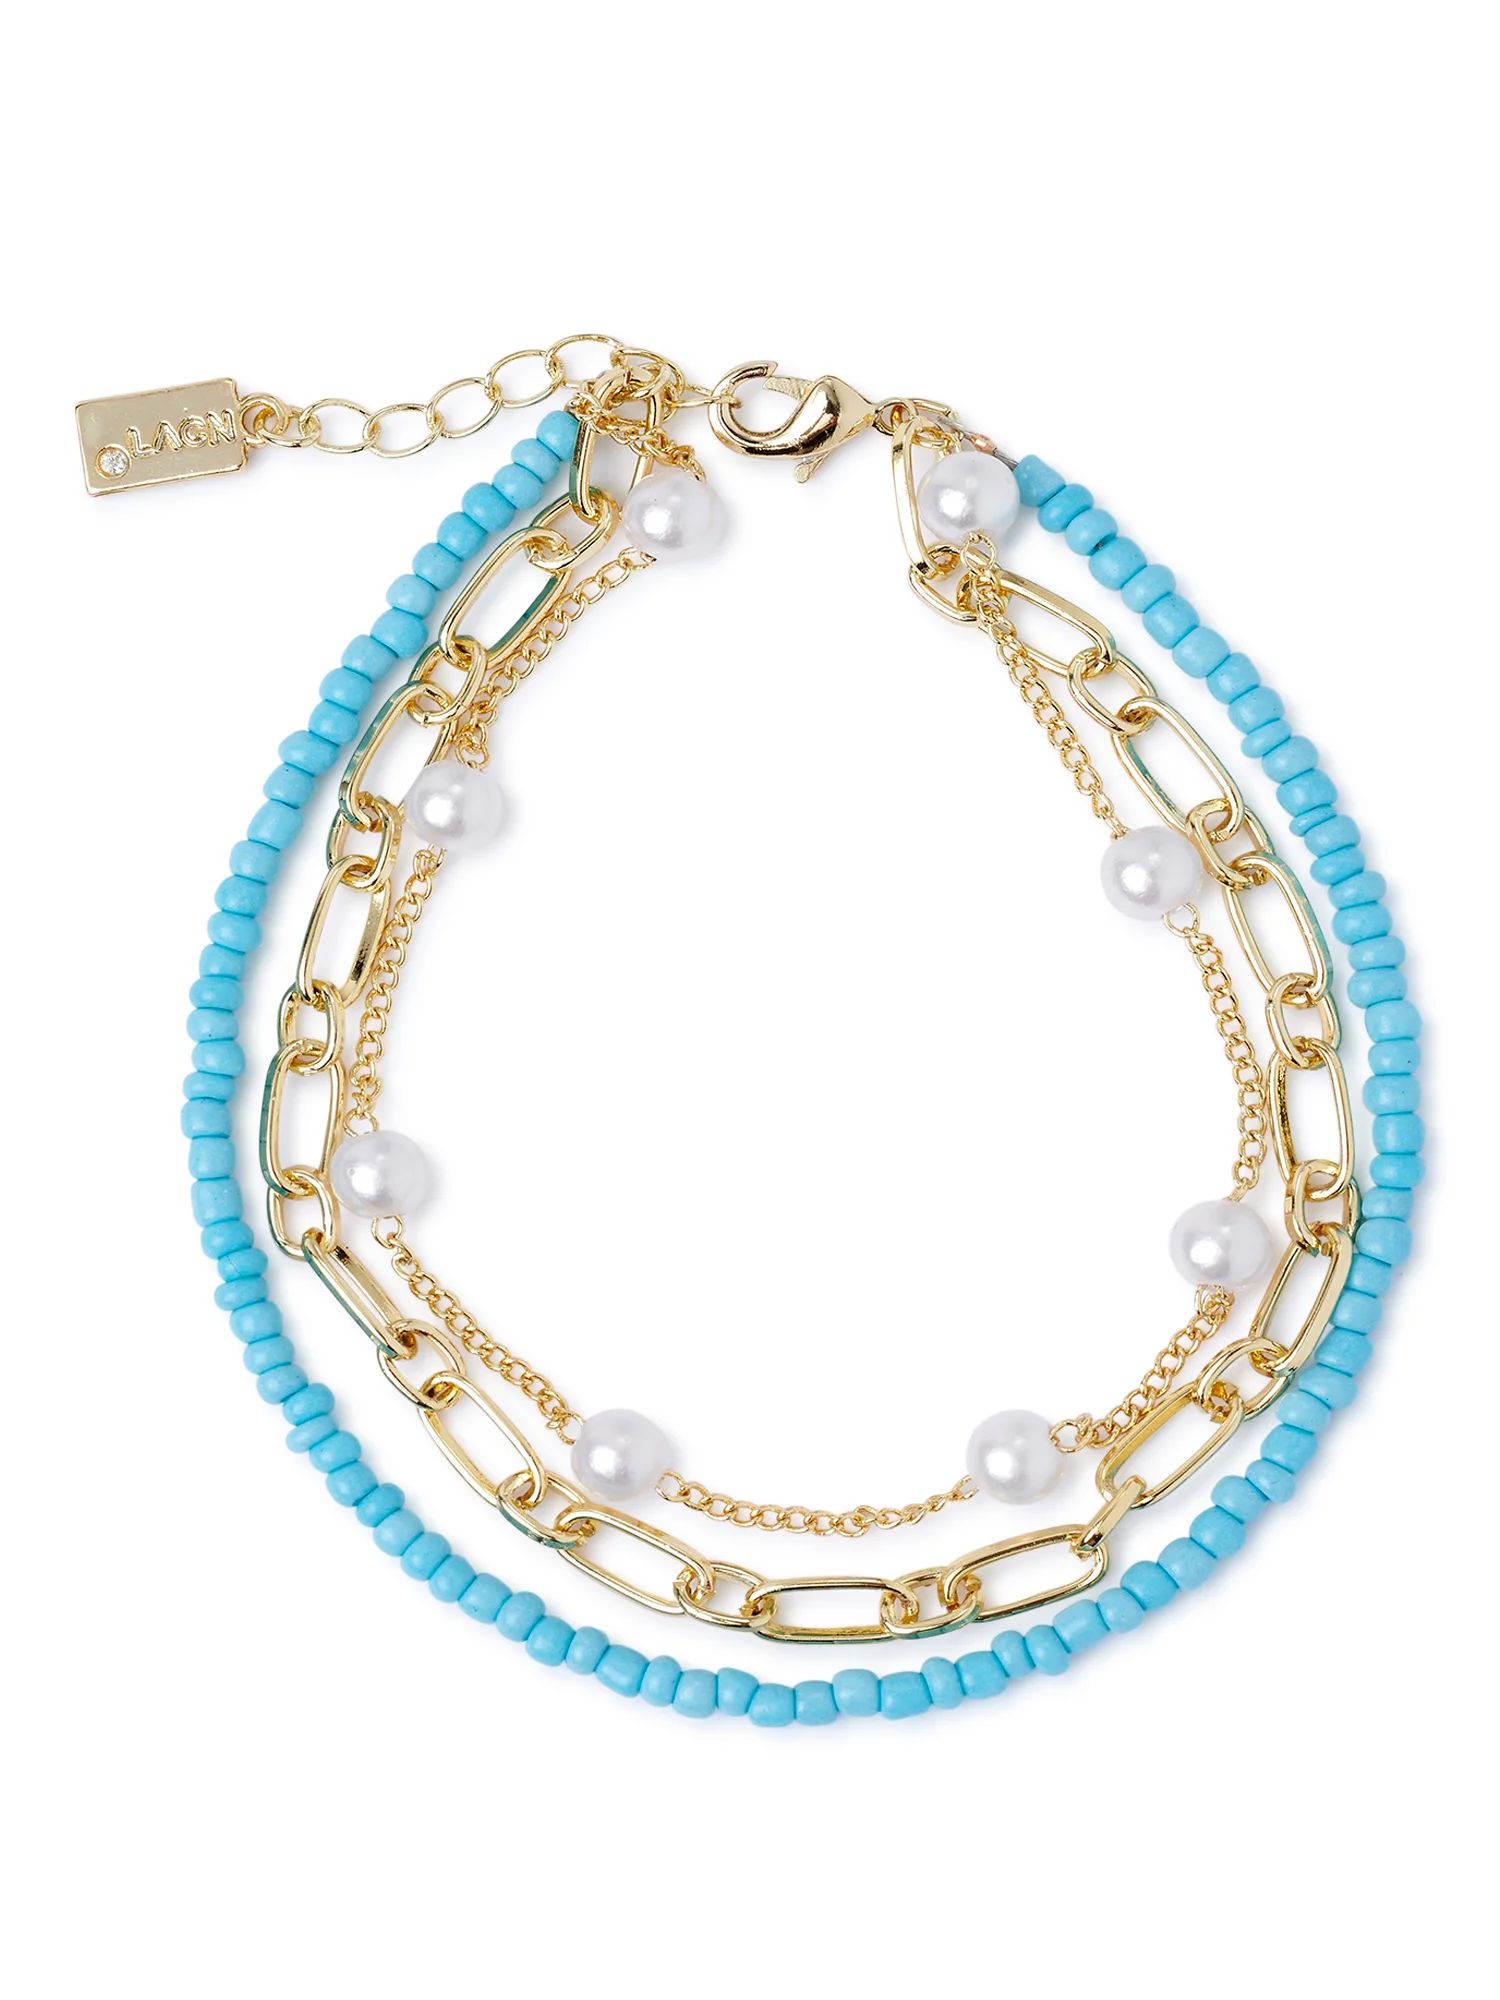 Scoop Women’s 14KT Gold-Plated Turquoise Bead, Clip and Chain Anklet with Faux Pearl Accents - ... | Walmart (US)